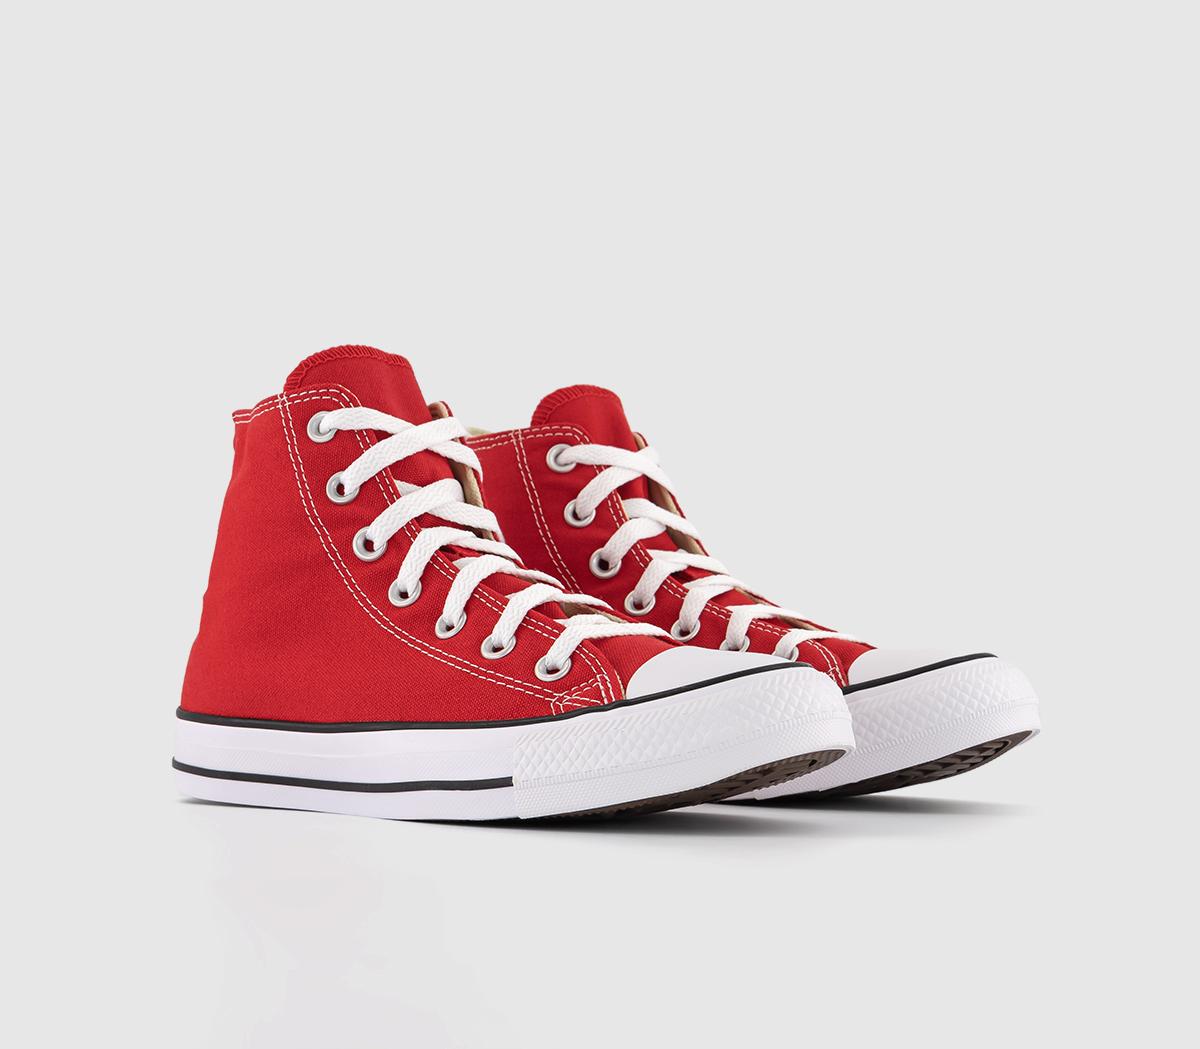 Converse Kids All Star High Top Red, White And Blue Canvas Printed Trainers, 5.5